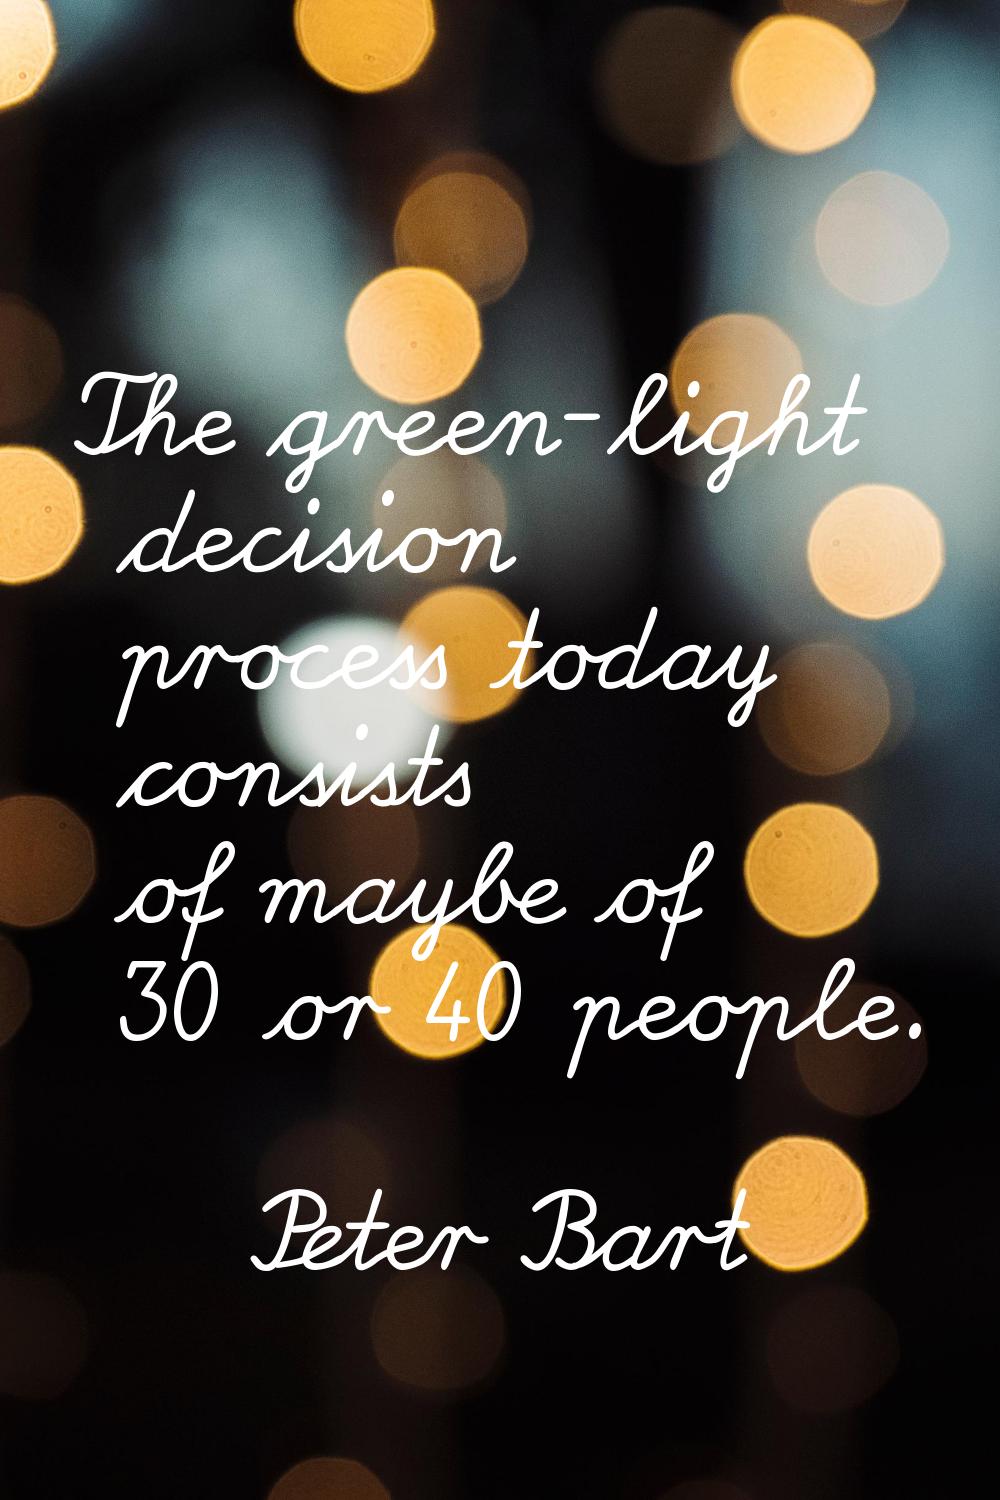 The green-light decision process today consists of maybe of 30 or 40 people.